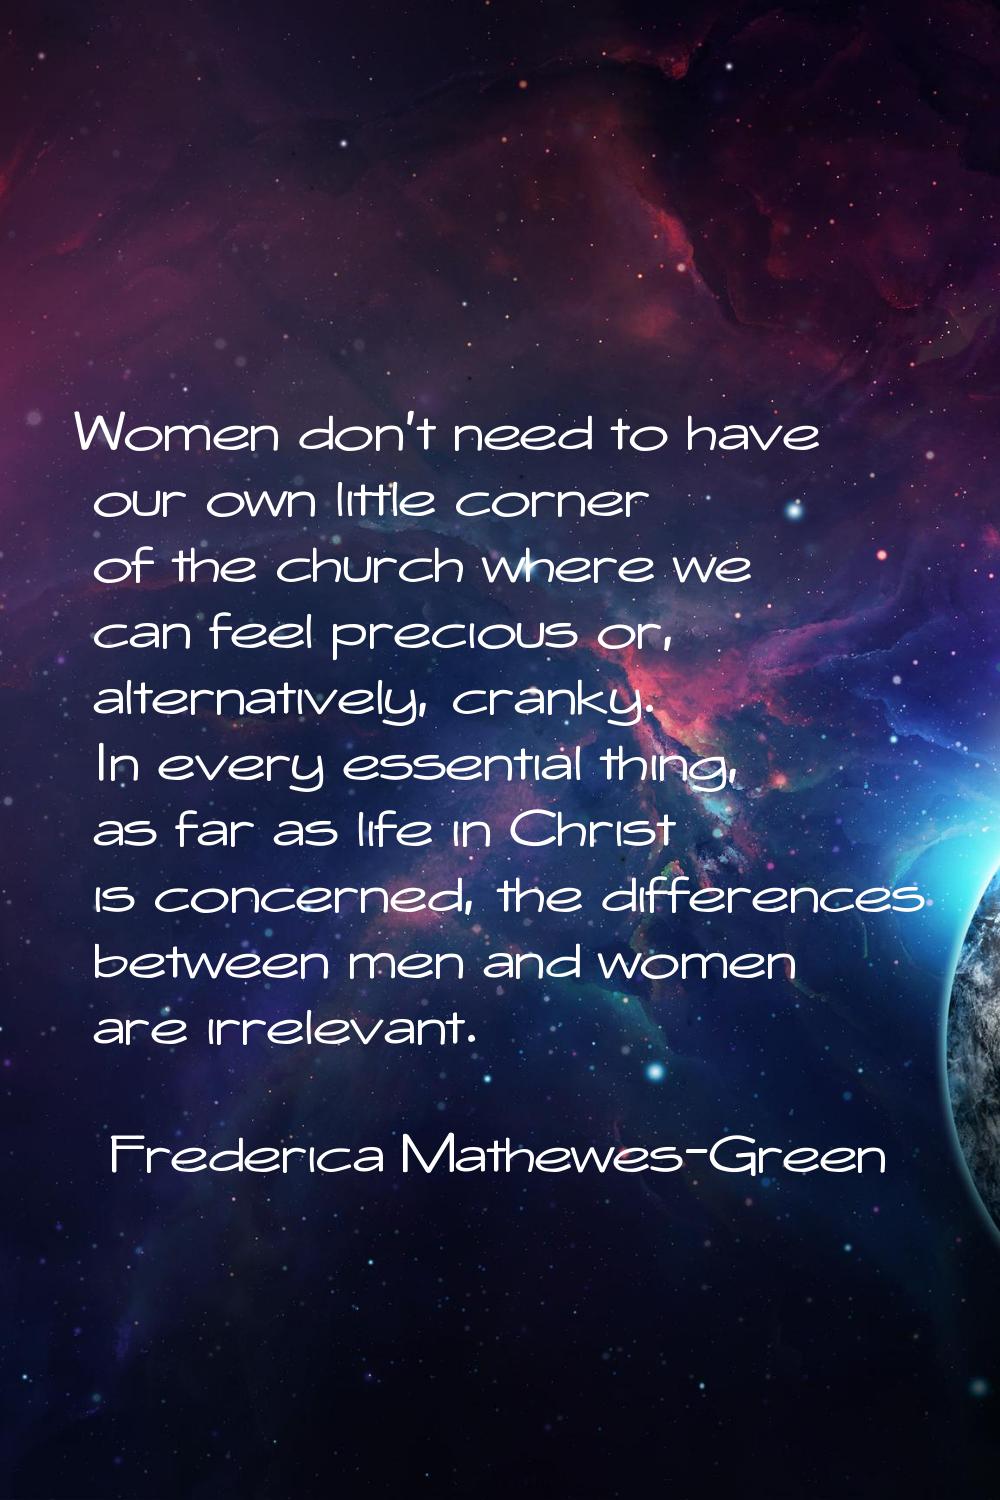 Women don't need to have our own little corner of the church where we can feel precious or, alterna